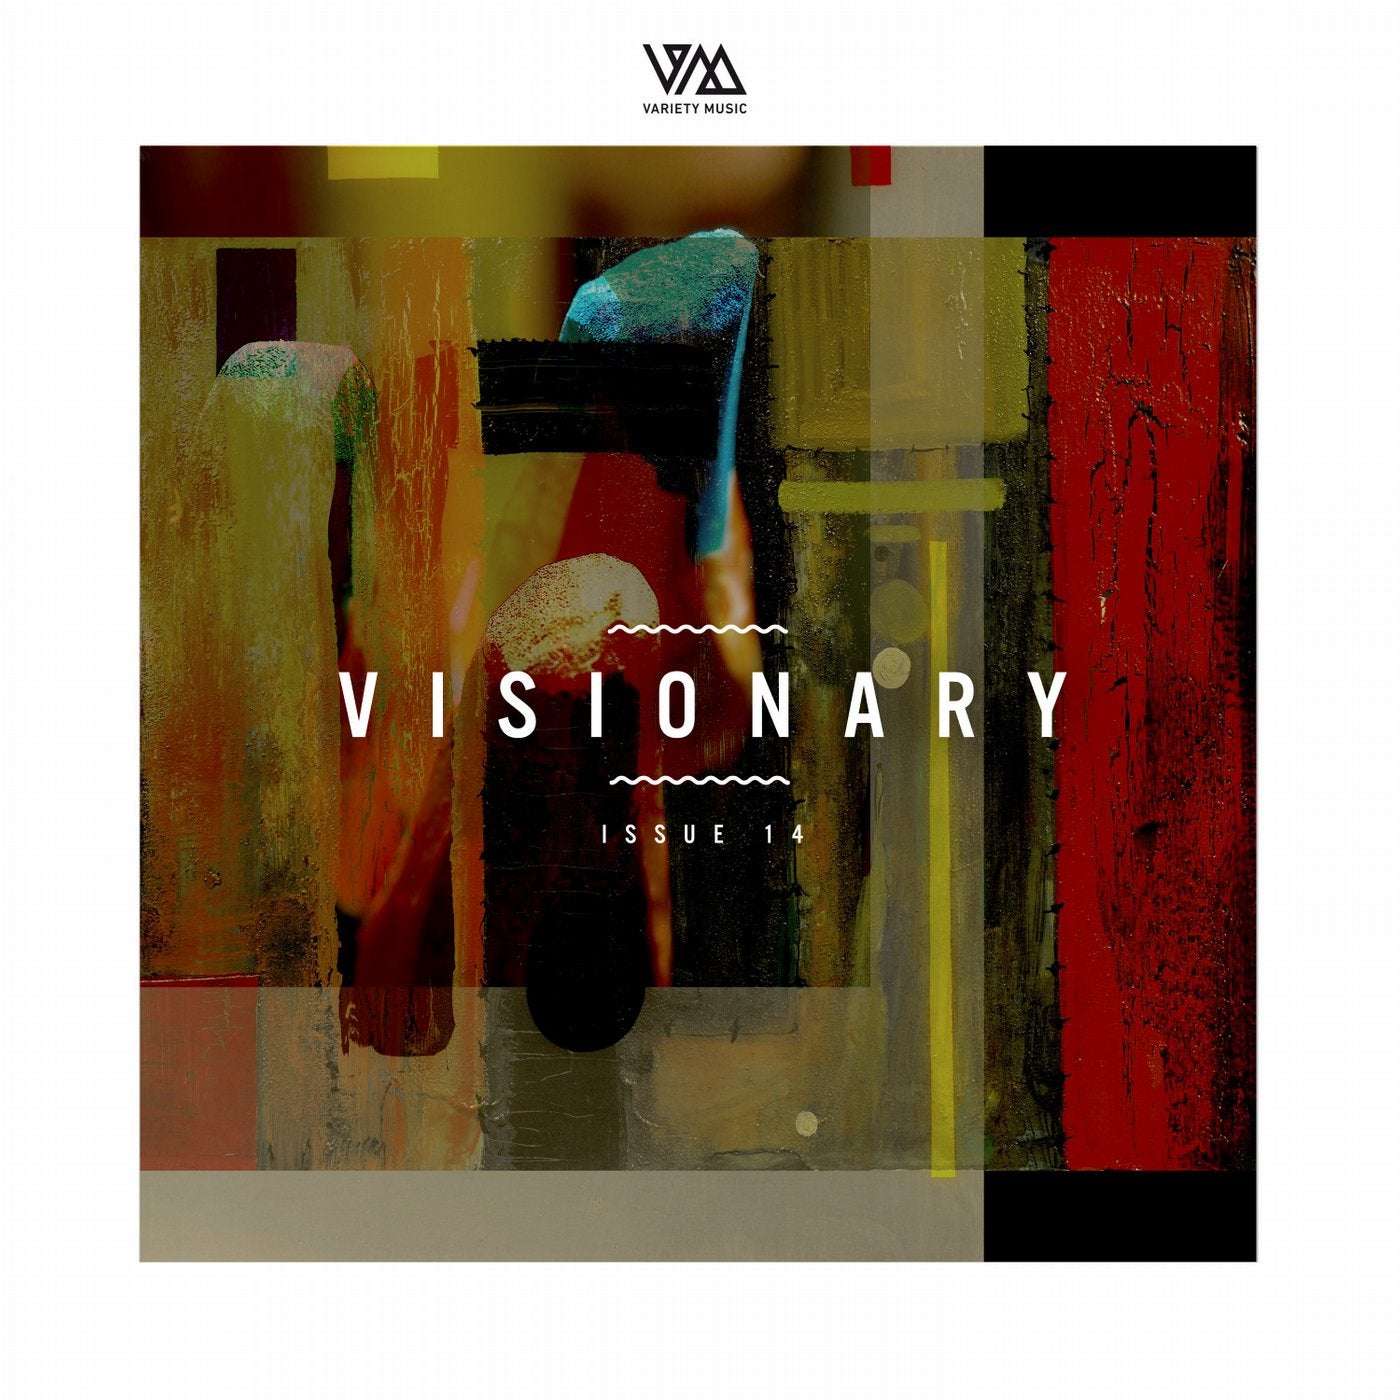 Variety Music pres. Visionary Issue 14